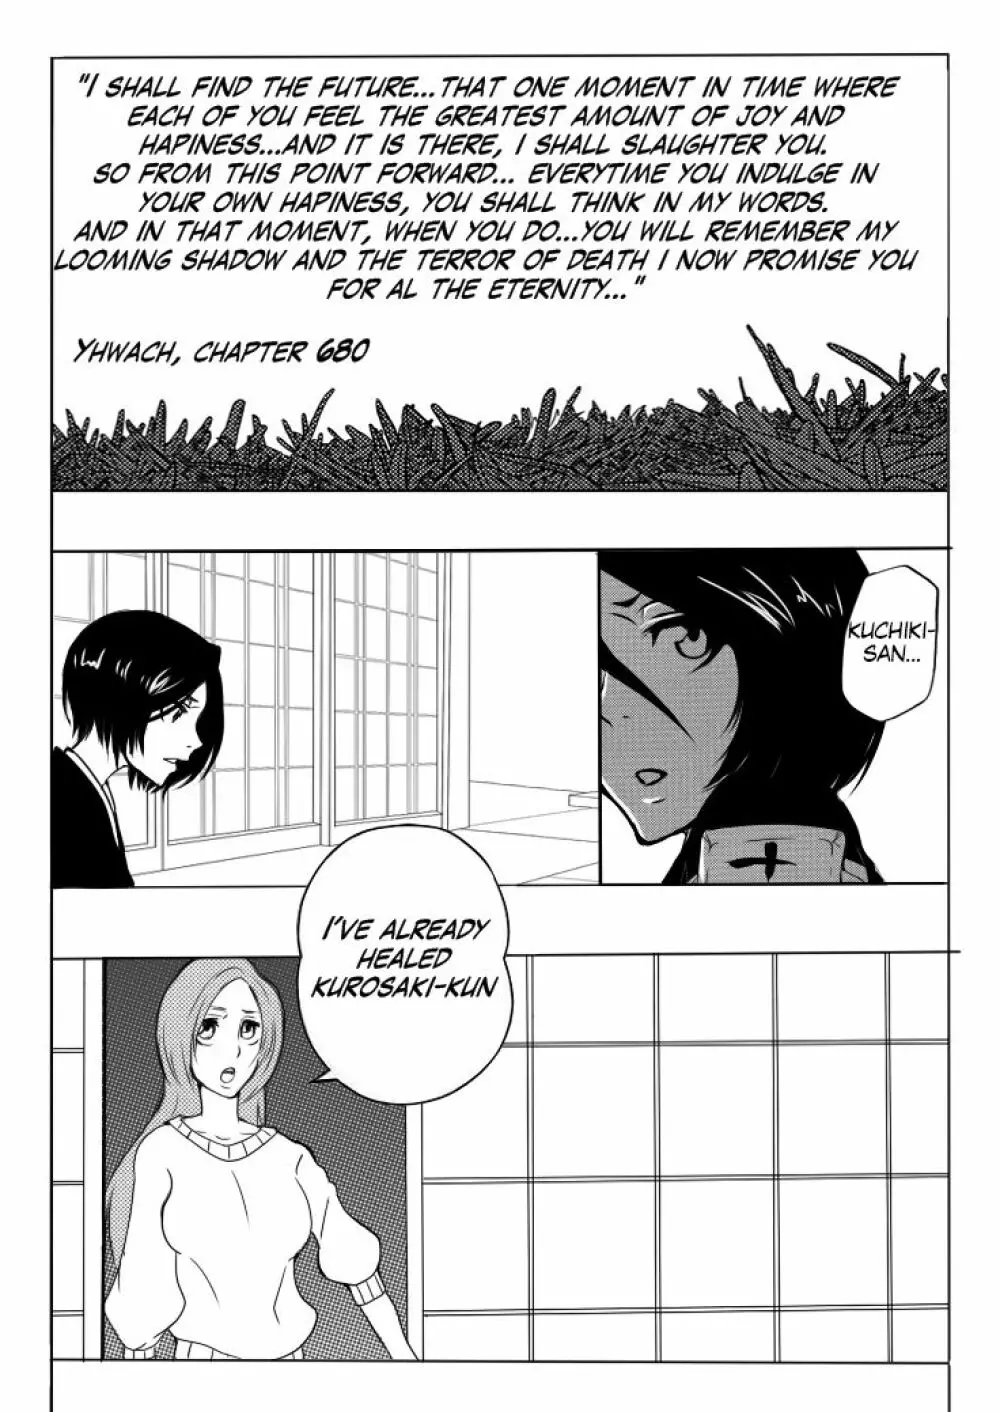 A Perfect End? [bleach)ongoing - page1